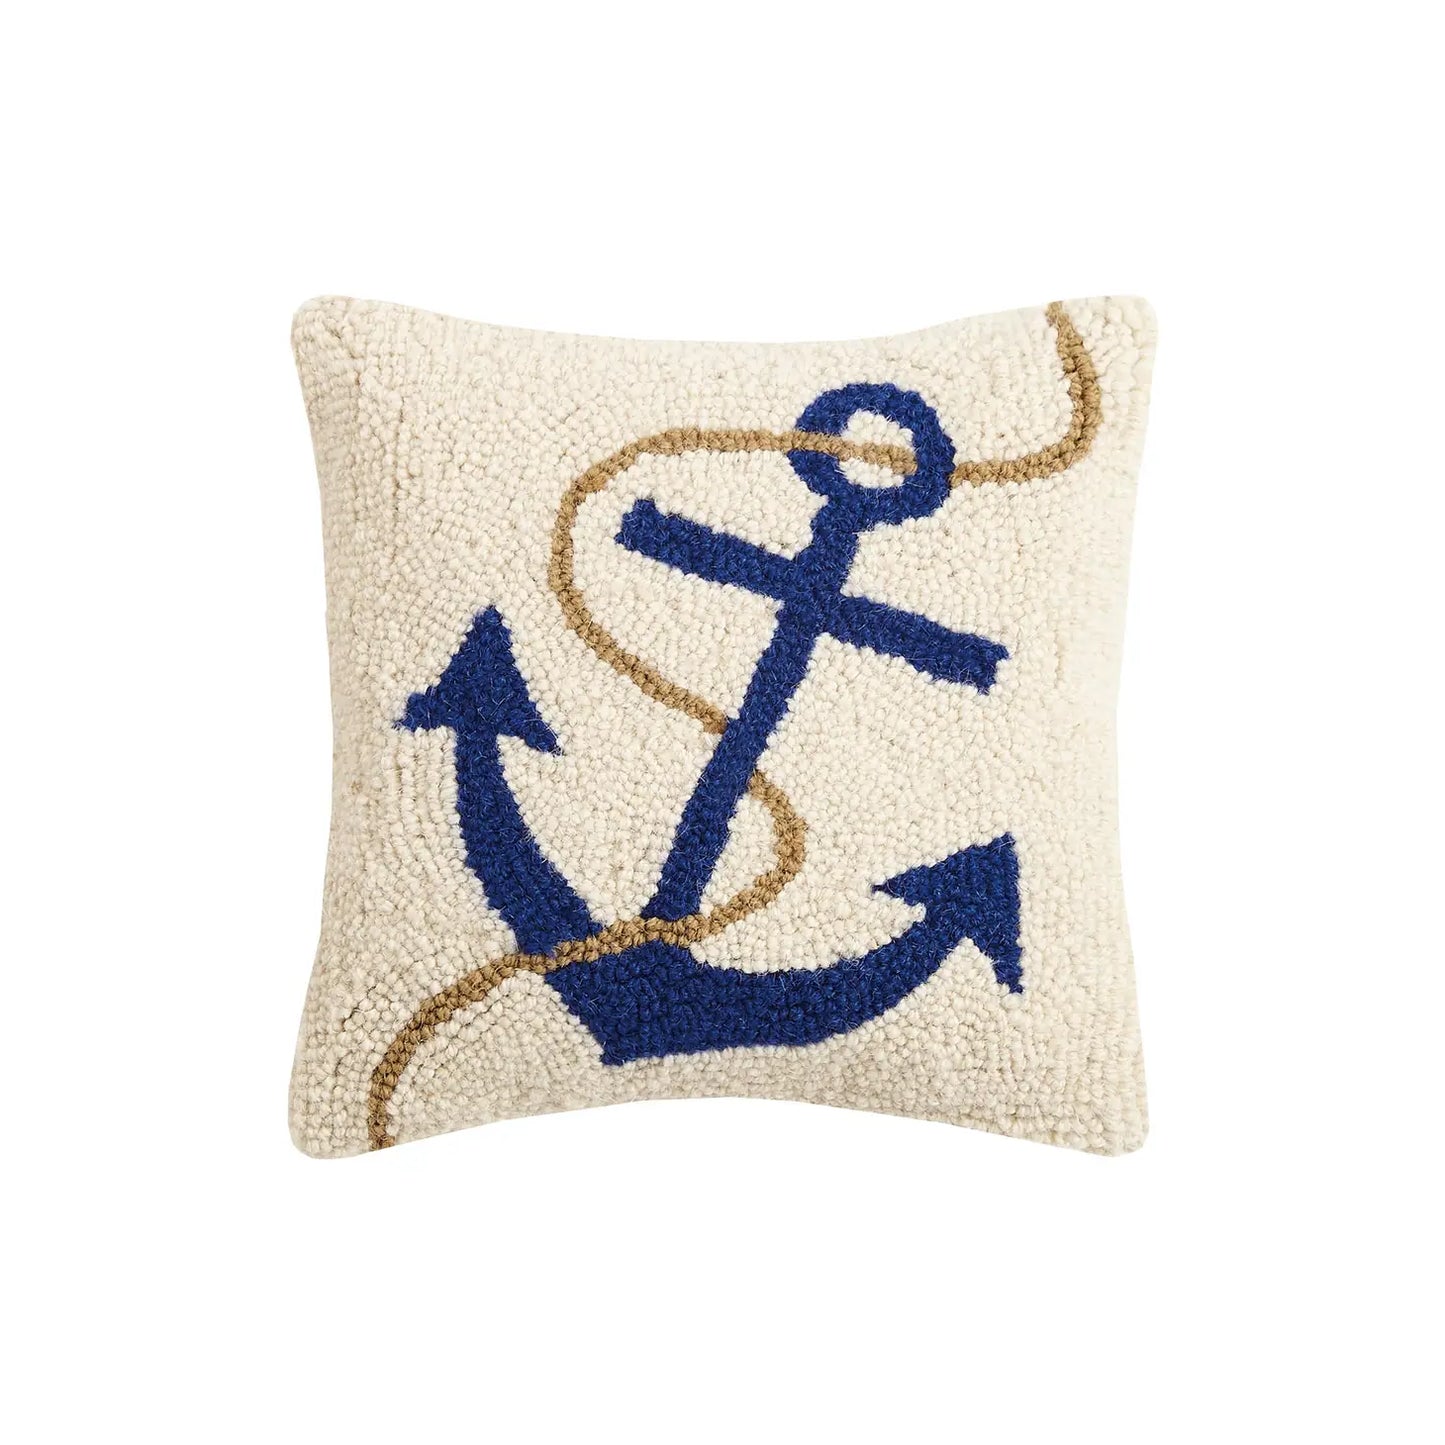 Anchor and Rope Hook Pillow